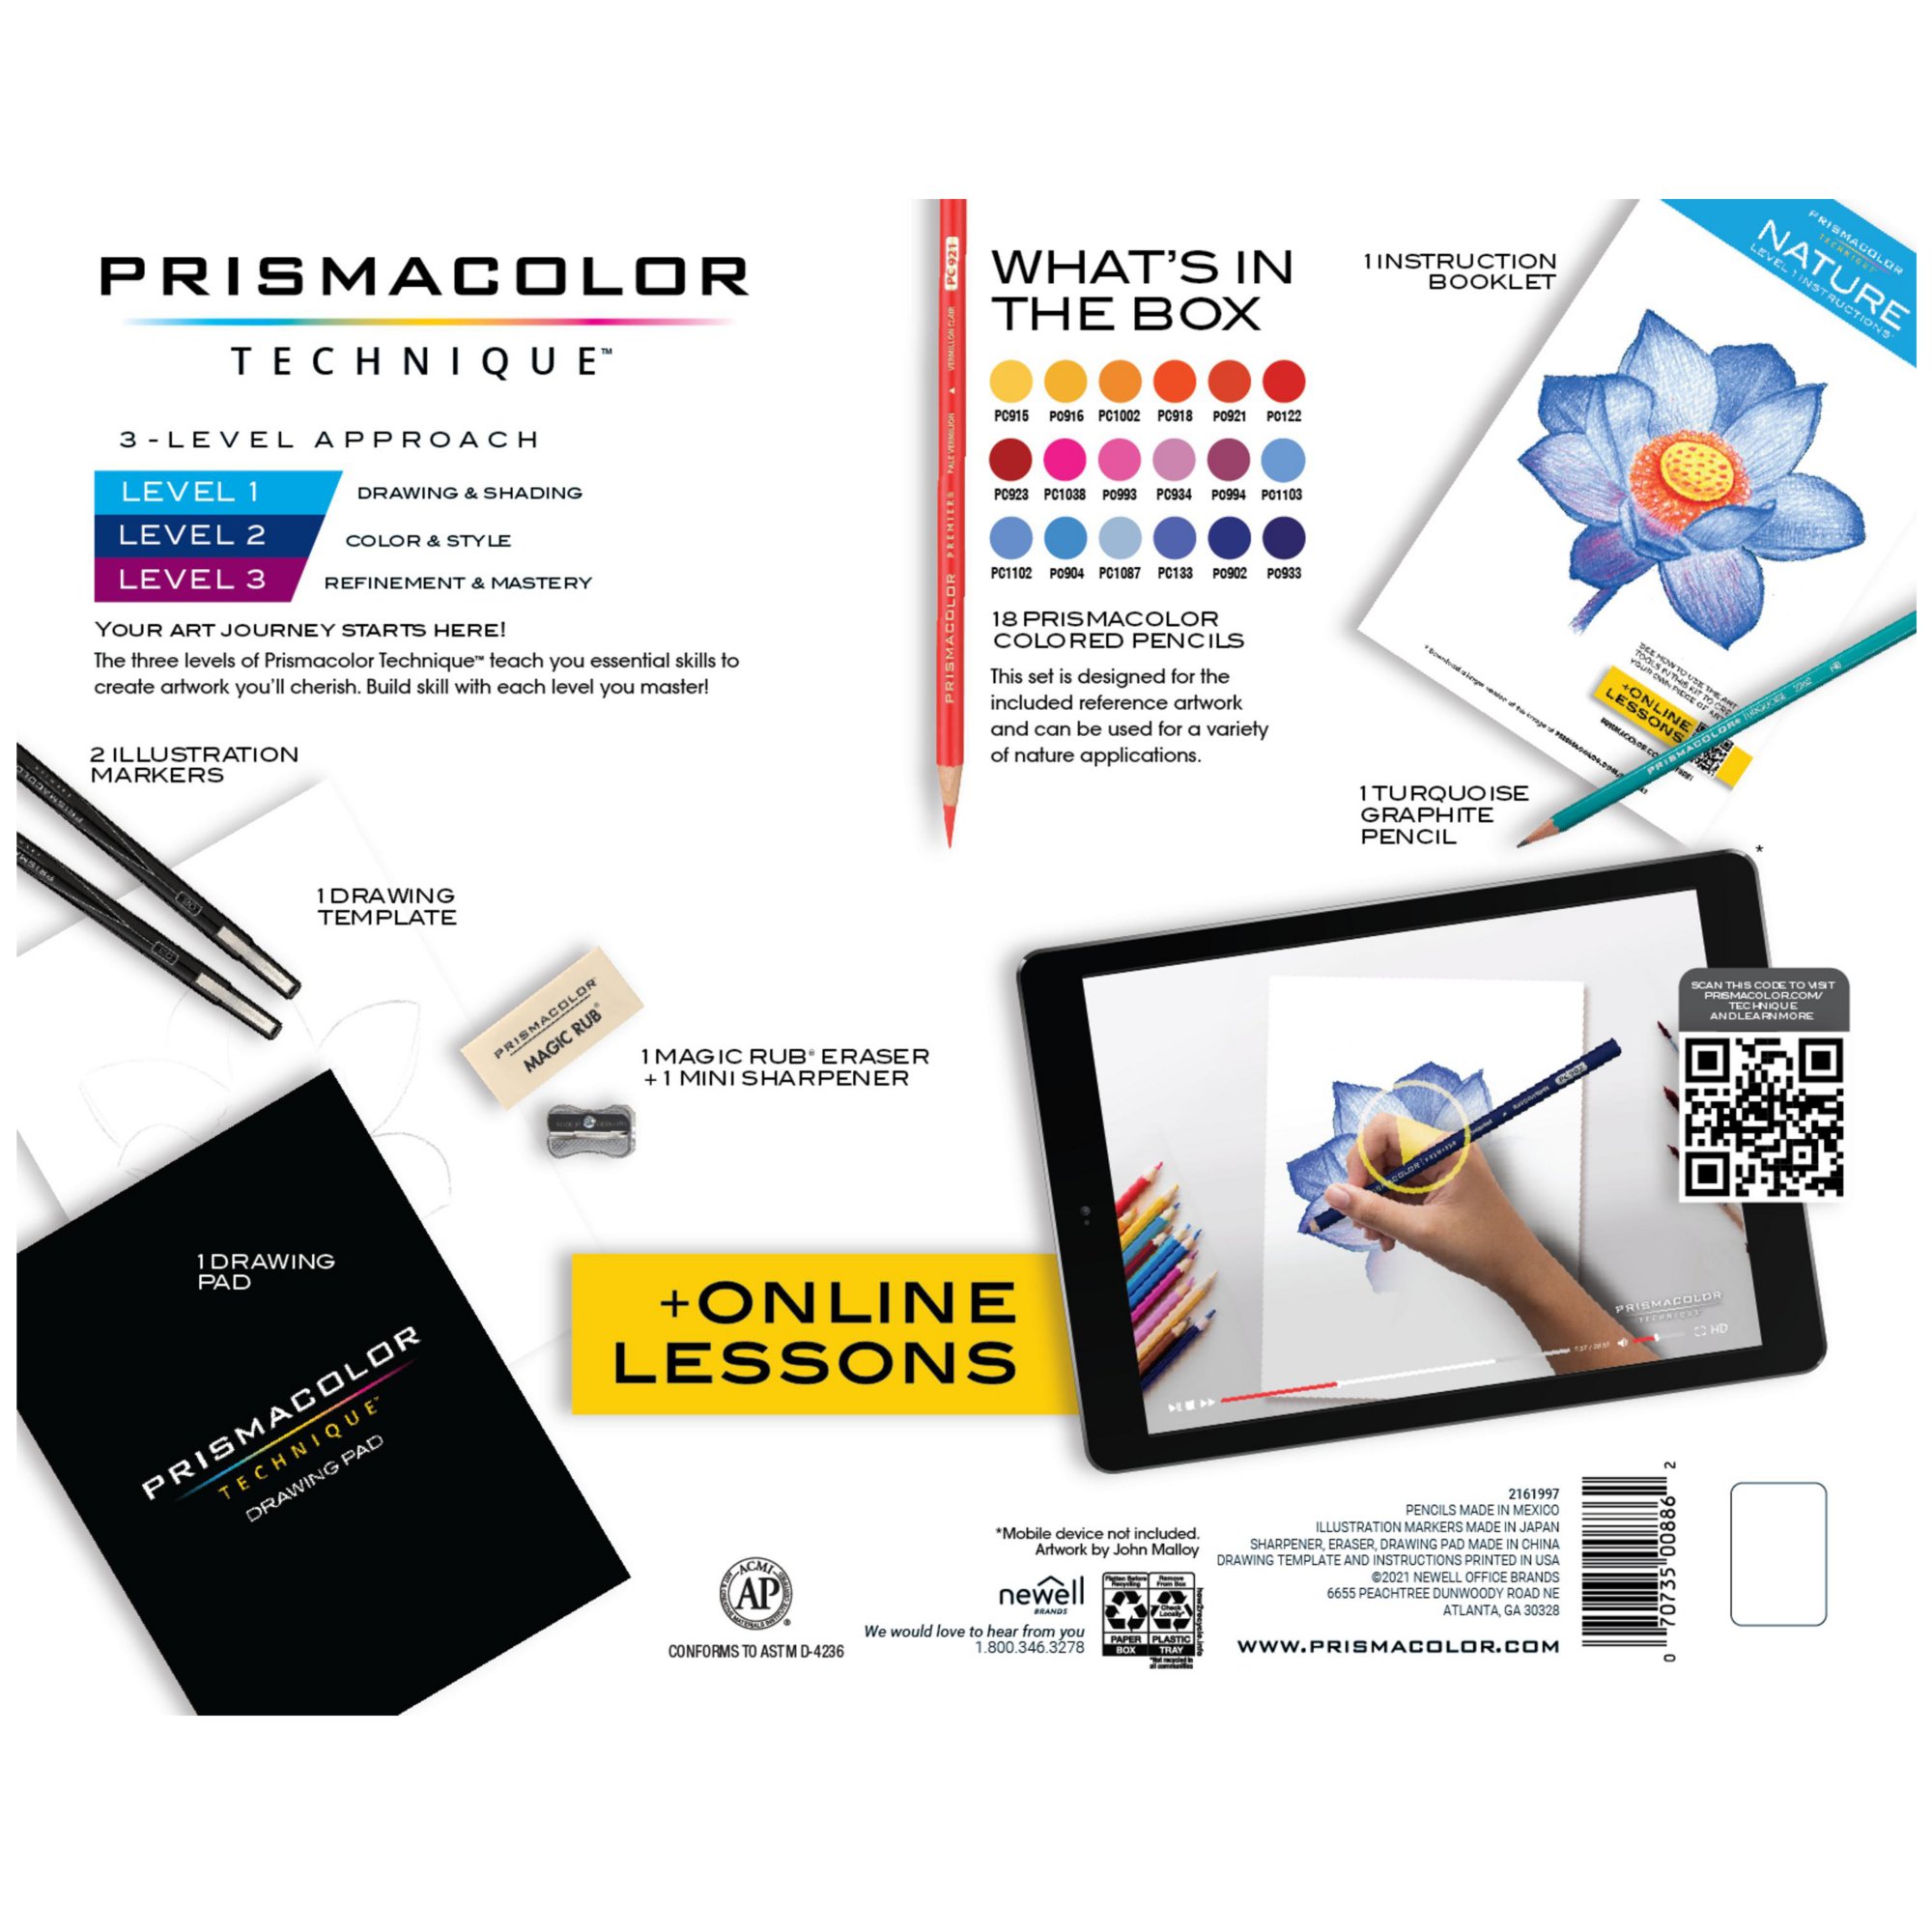 Build your drawing skills this summer with Prismacolor Technique onlin